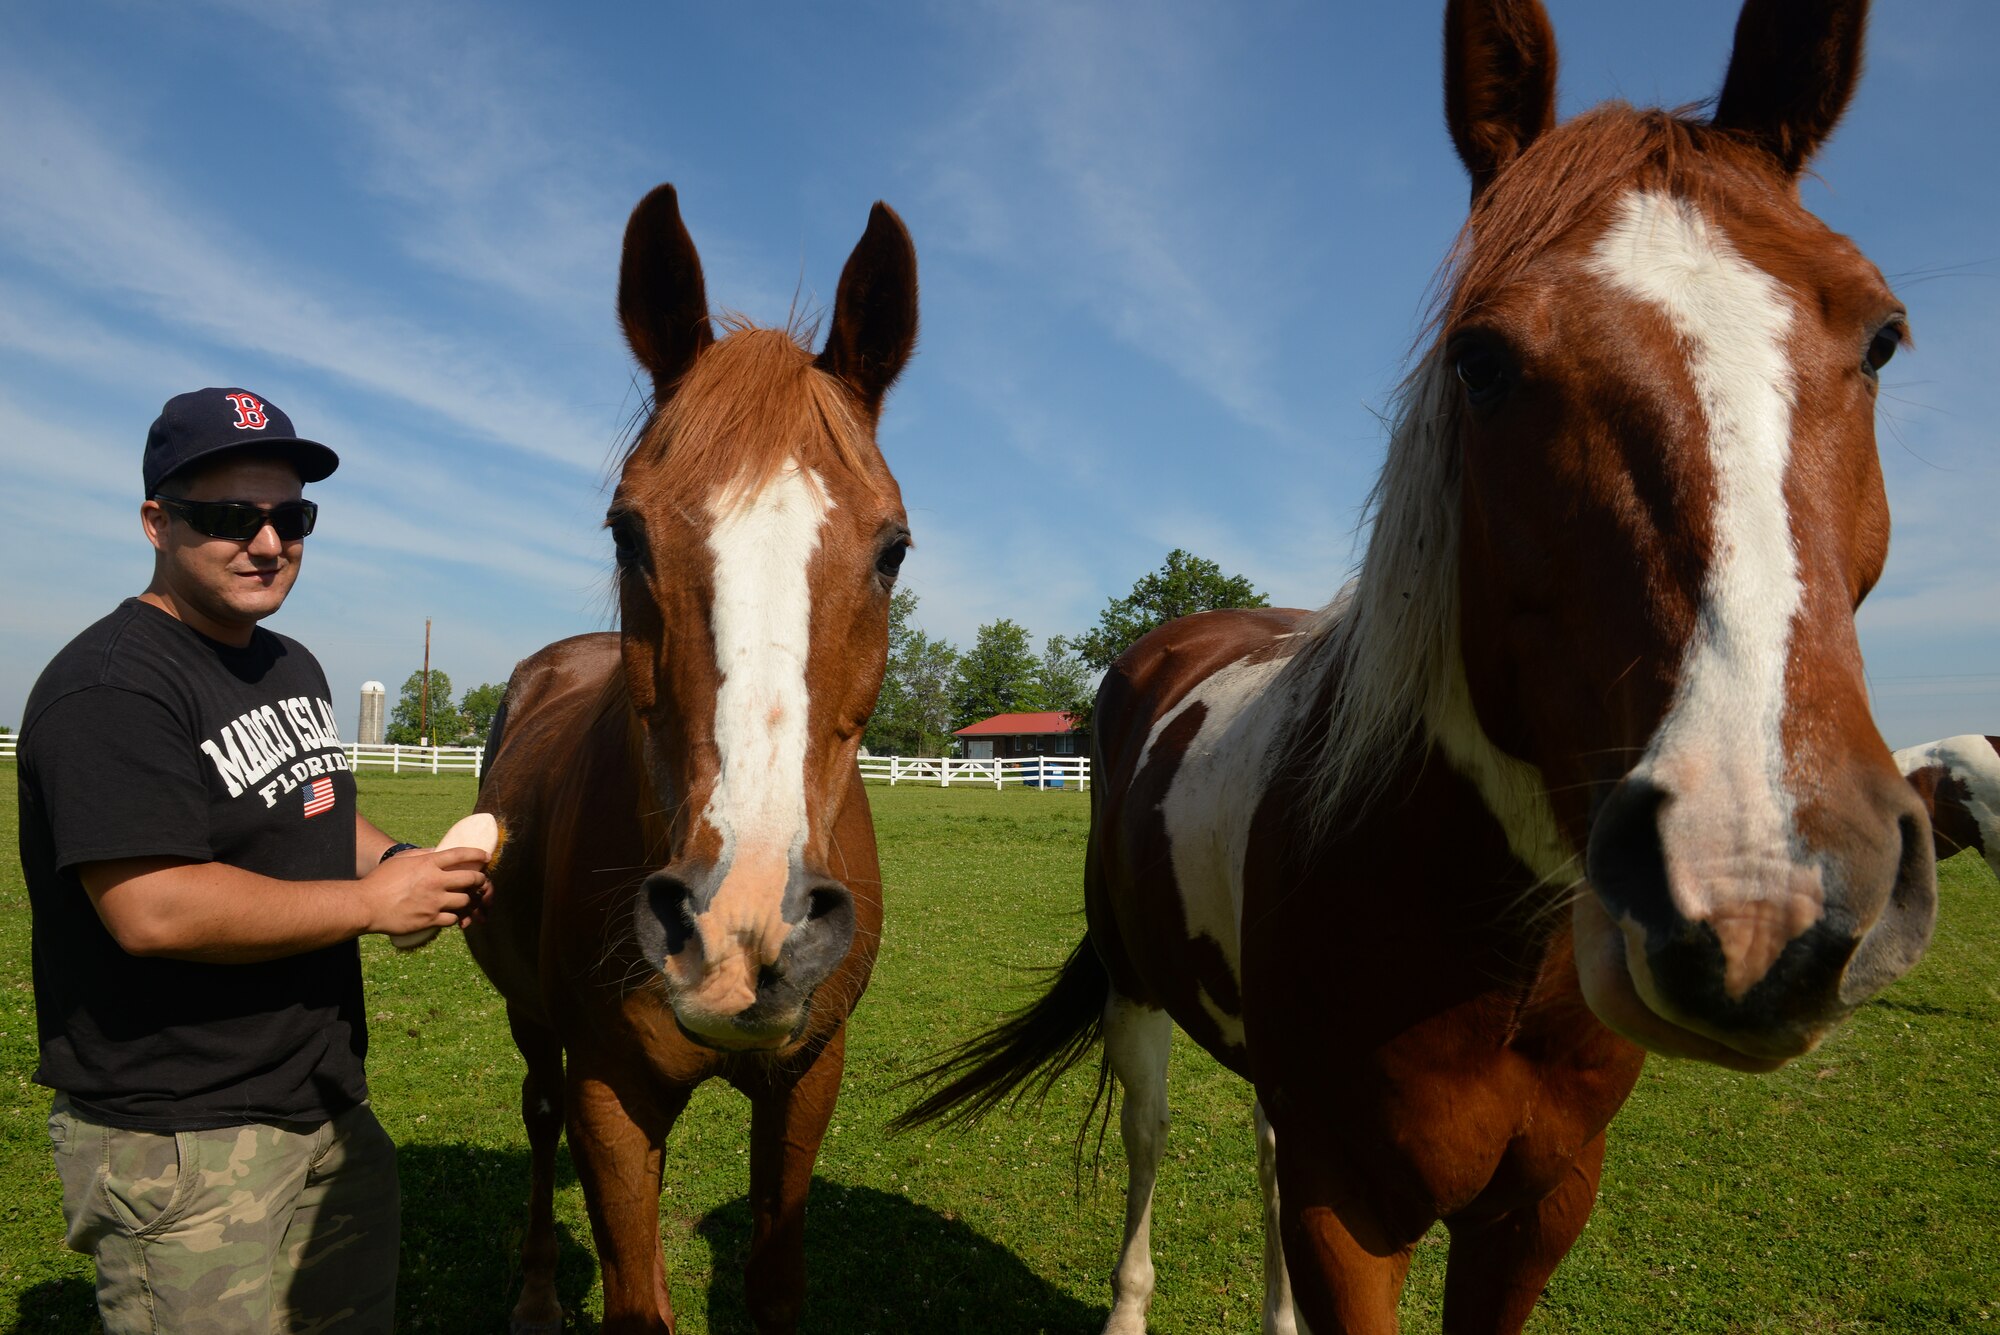 Senior Airman Joshua Rose, 375th Operations Support Squadron Air Traffic Controller, brushes some of the nine horses at Chakota, a therapeutic horseback riding center, Germantown, Illinois, May 28, 2015. The Acushnet, Massachusetts native has volunteered at Chakota before, bringing a group of Airmen with him to enhance the facility. (U.S. Air Force photo by Airman 1st Class Erica Crossen)